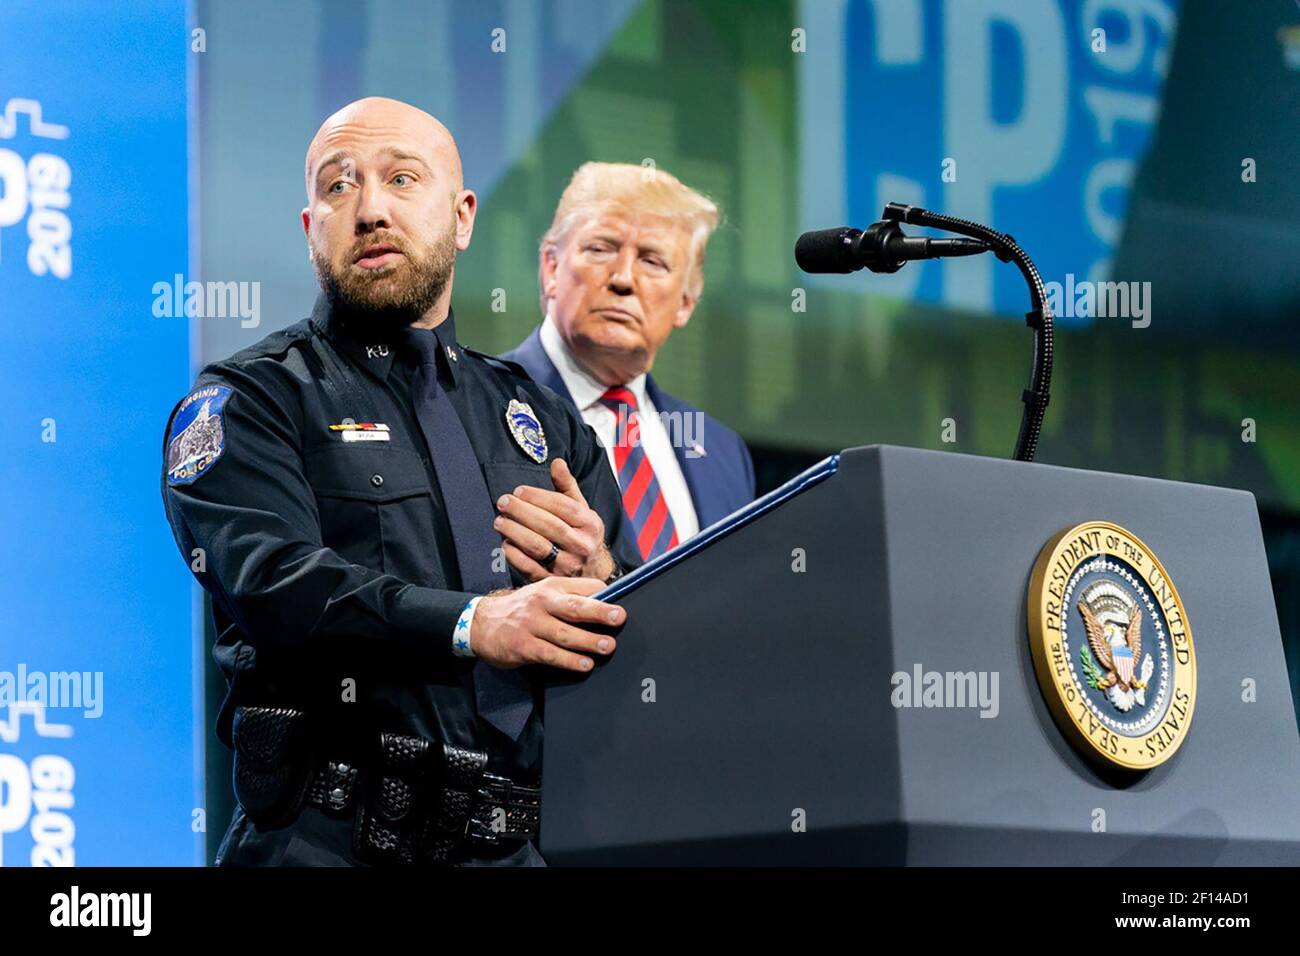 President Donald Trump listens as K9 Officer Nick Grivna of the Virginia Minnesota Police Department addresses the International Association of Chiefs of Police Annual Conference and Exposition at the McCormick Place Convention Center Monday Oct. 28 2019 in Chicago. Stock Photo